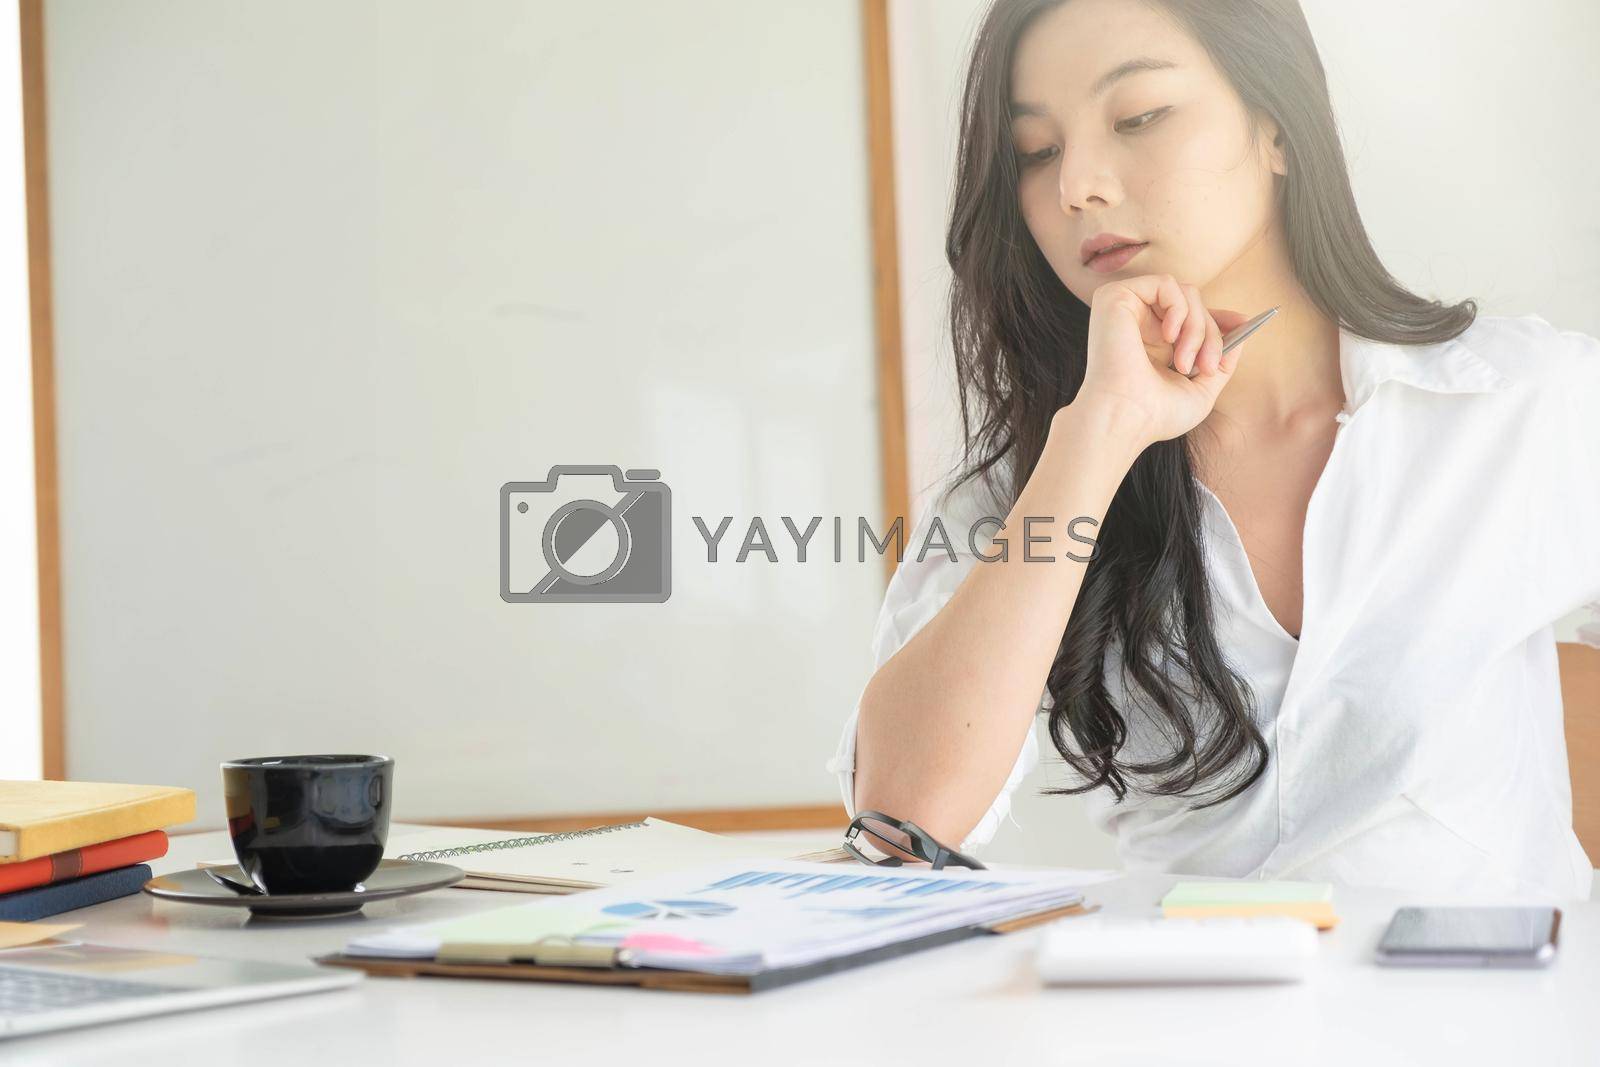 Royalty free image of Young asian entrepreneur cogitating thinking making important decision at workplace. Concentrated serious office worker millennial woman analysing results by nateemee